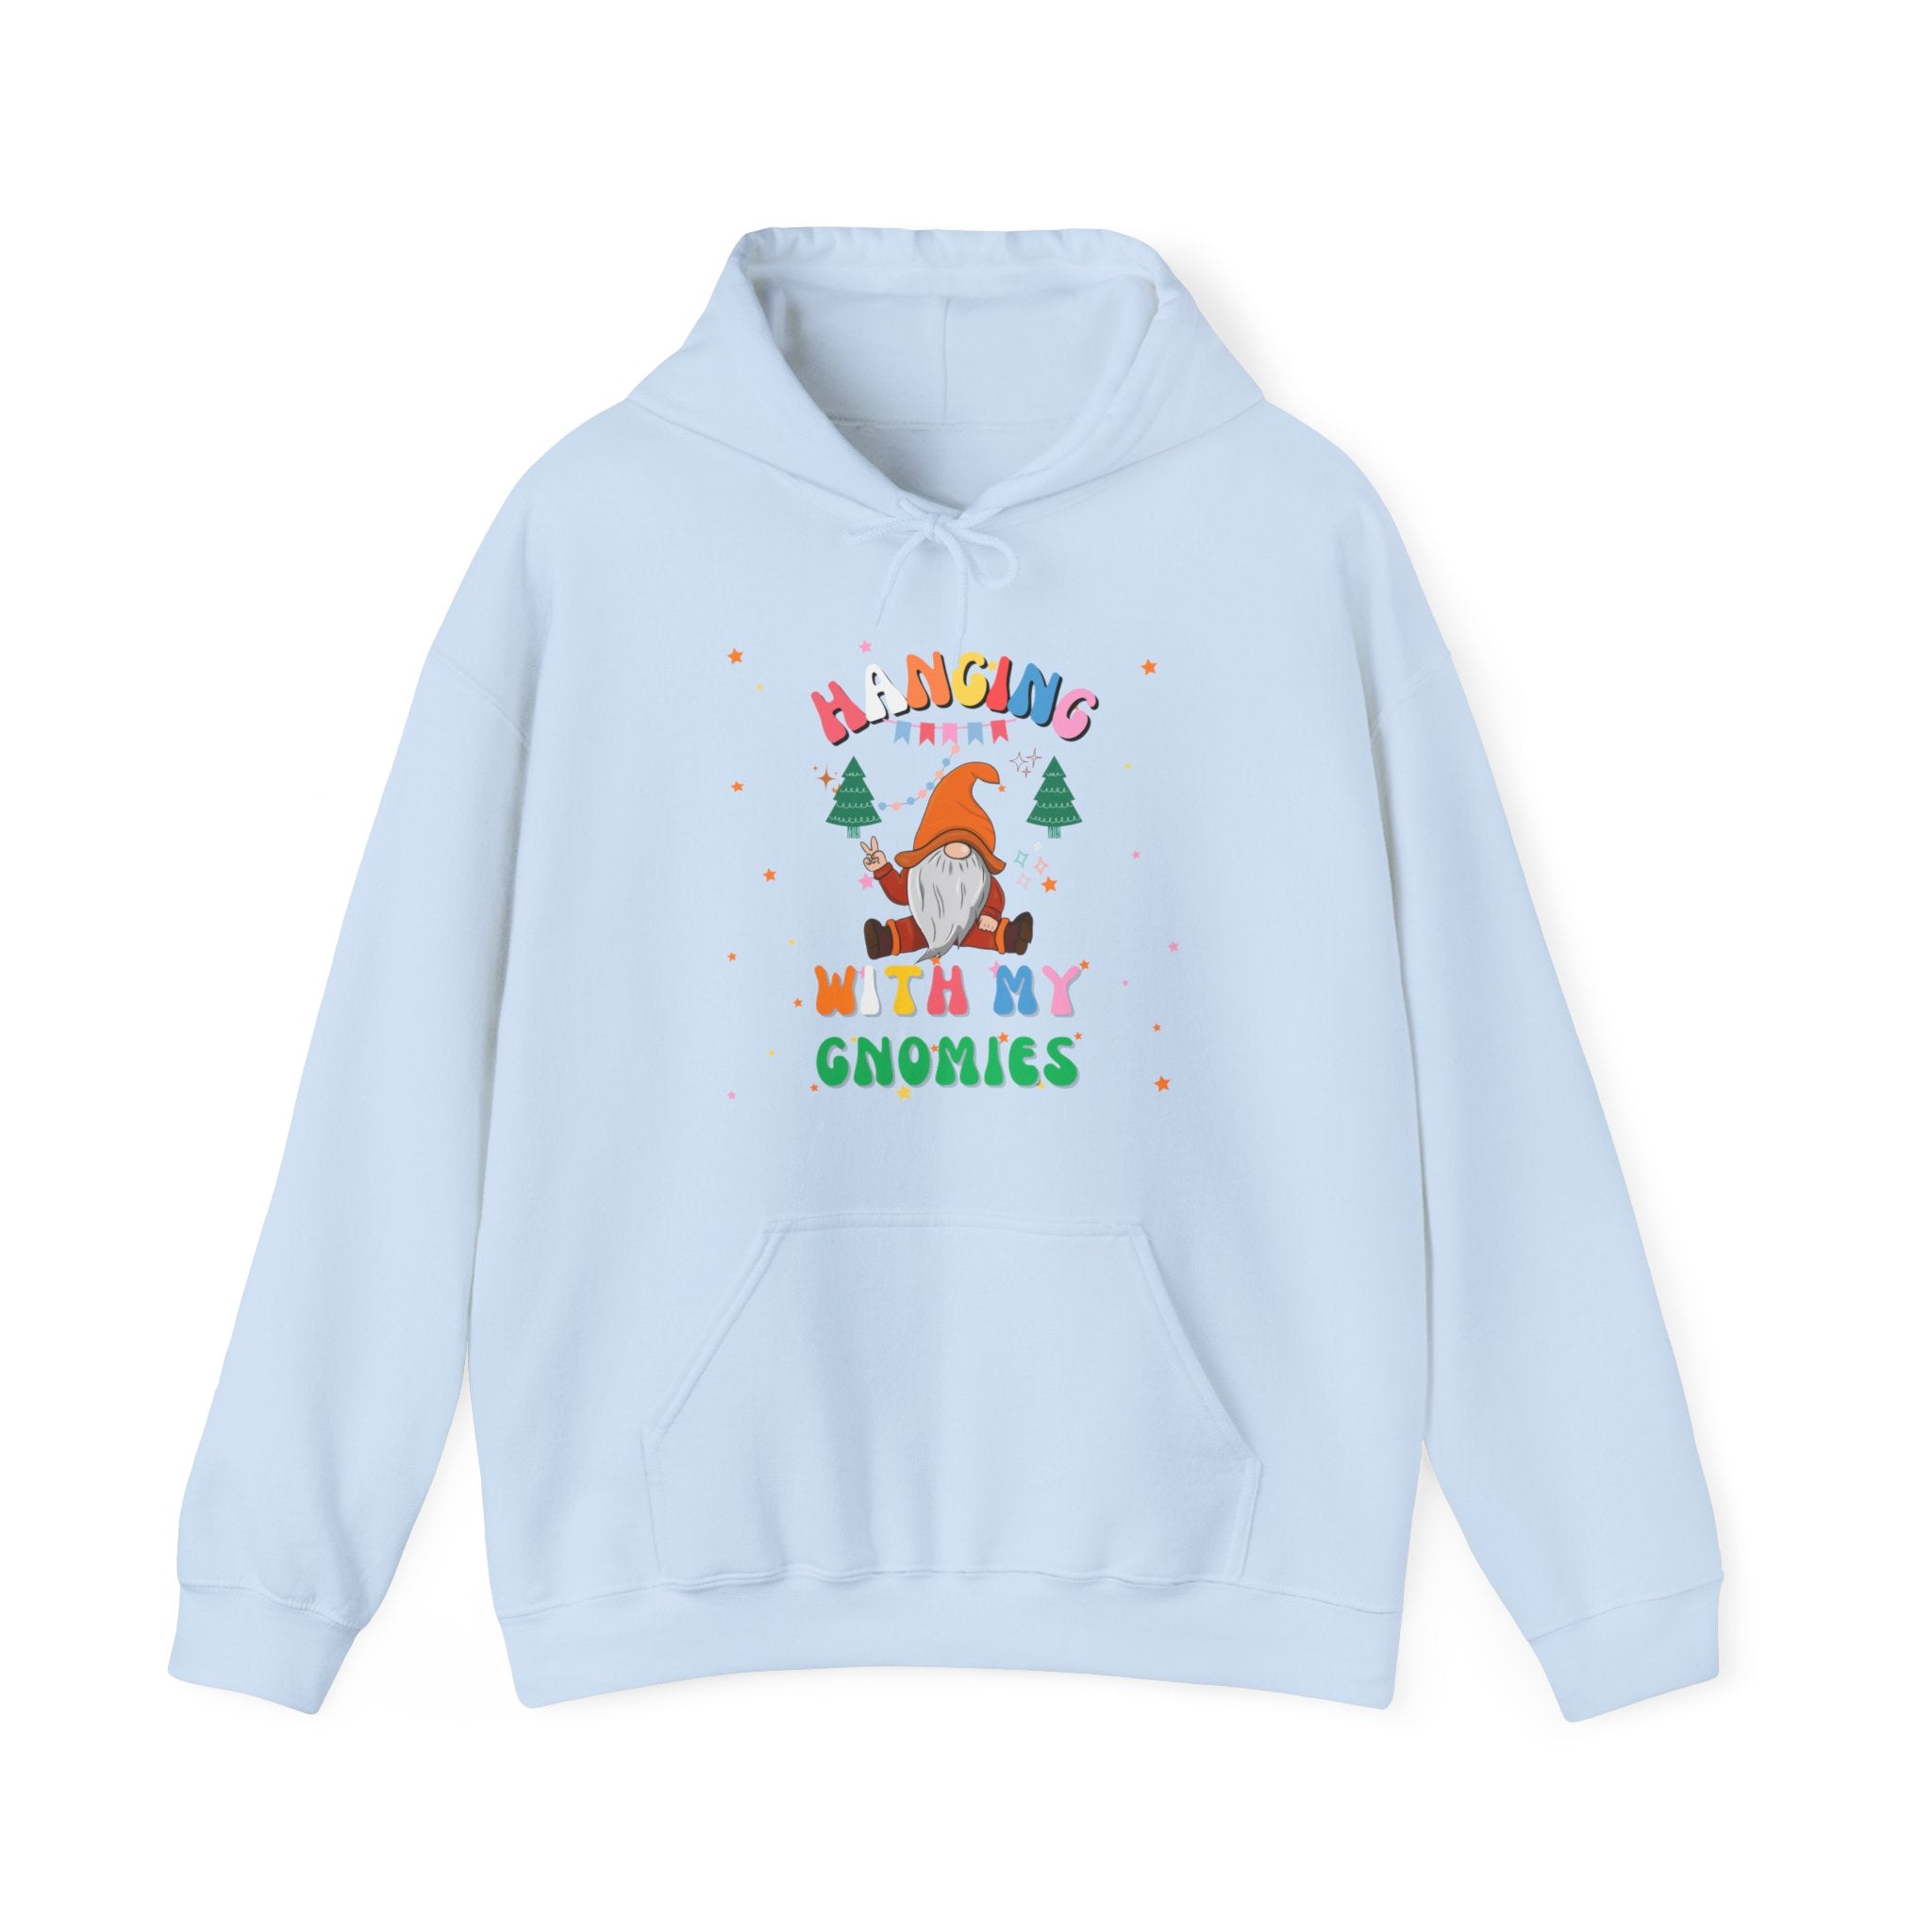 Hanging With My Gnomies - Christmas Edition : Regular Unisex Heavy Blend Hoodie